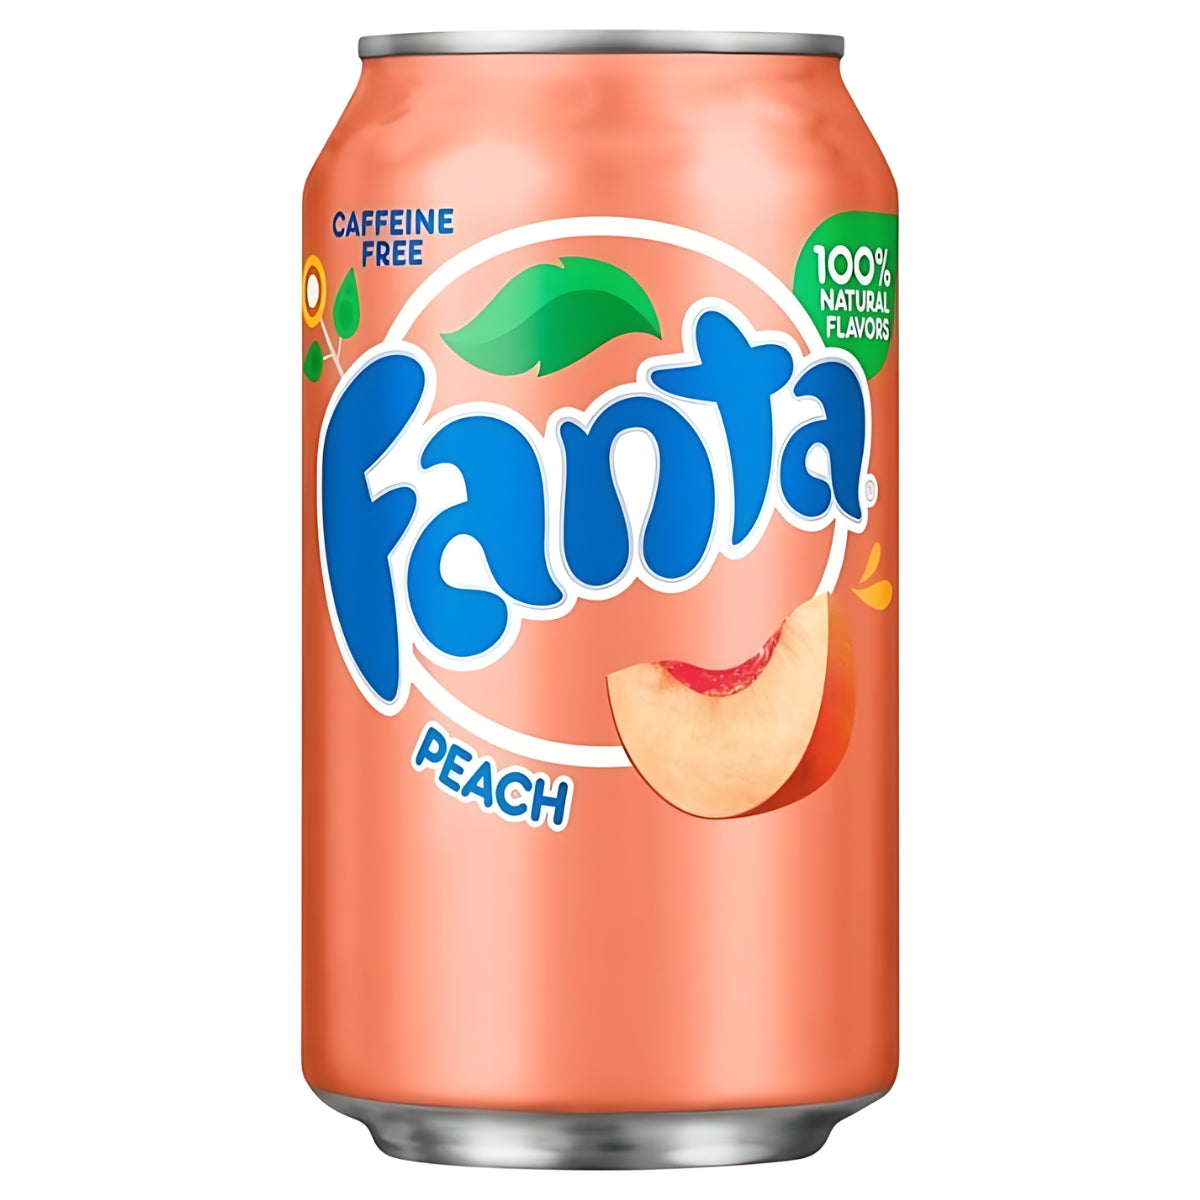 A can of Fanta - Peach Can (America) - 355ml with an orange background, displaying the iconic Fanta logo, a peach illustration, and labels indicating "Caffeine Free" and "100% Natural Flavors." Enjoy this refreshing drink any time of the day.